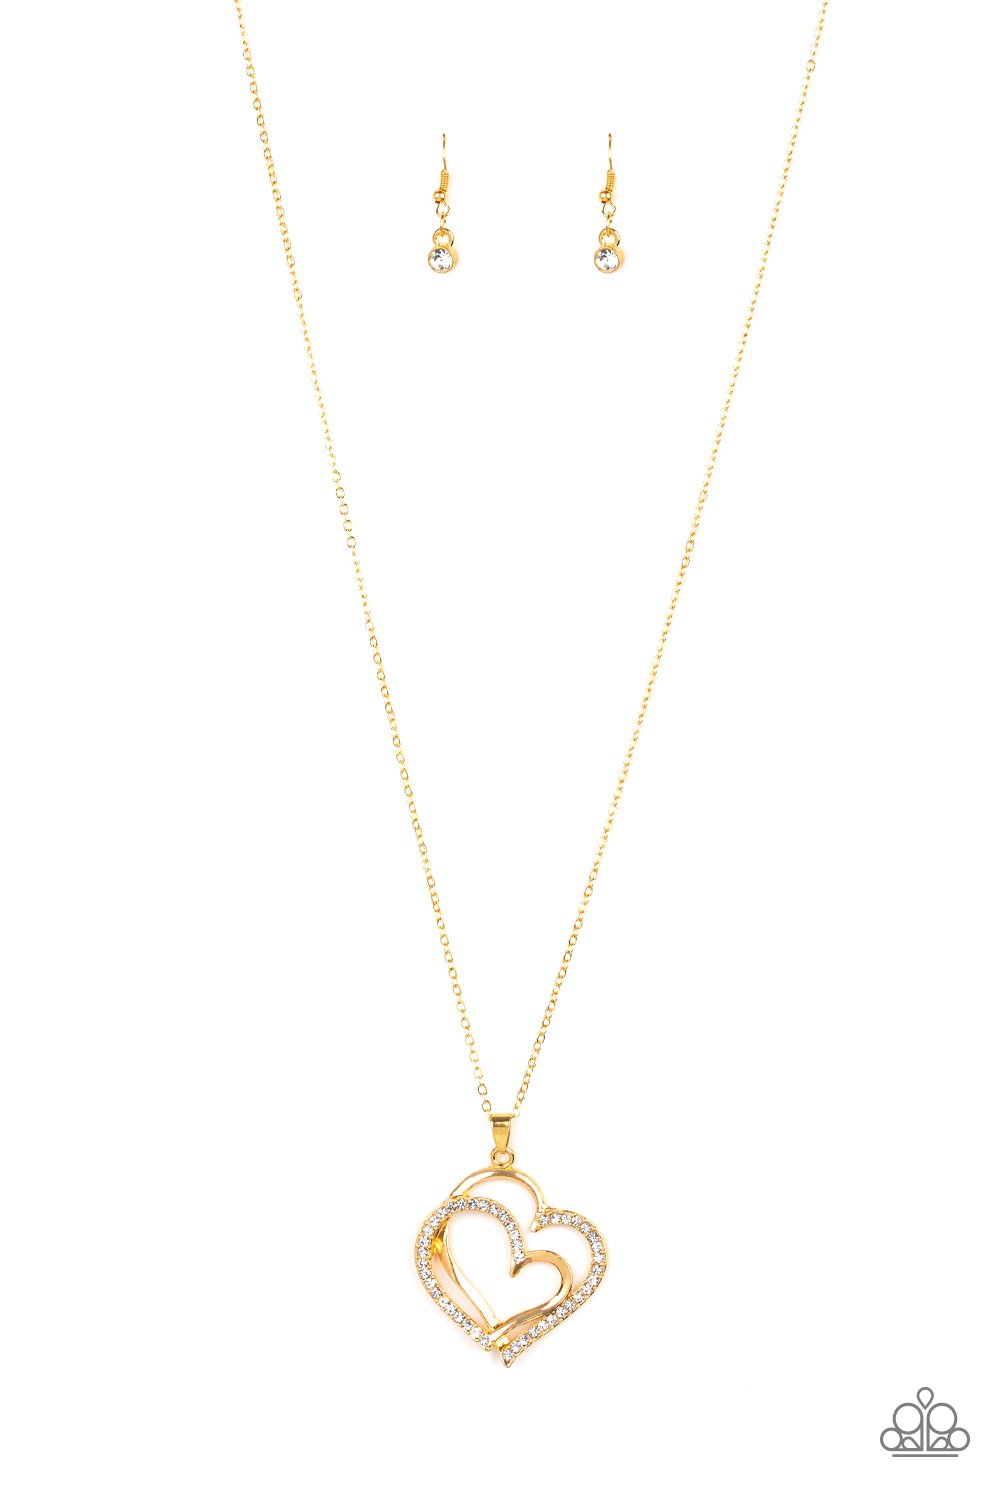 Paparazzi Lighthearted Luster Gold Long Necklace - P2RE-GDXX-343XX